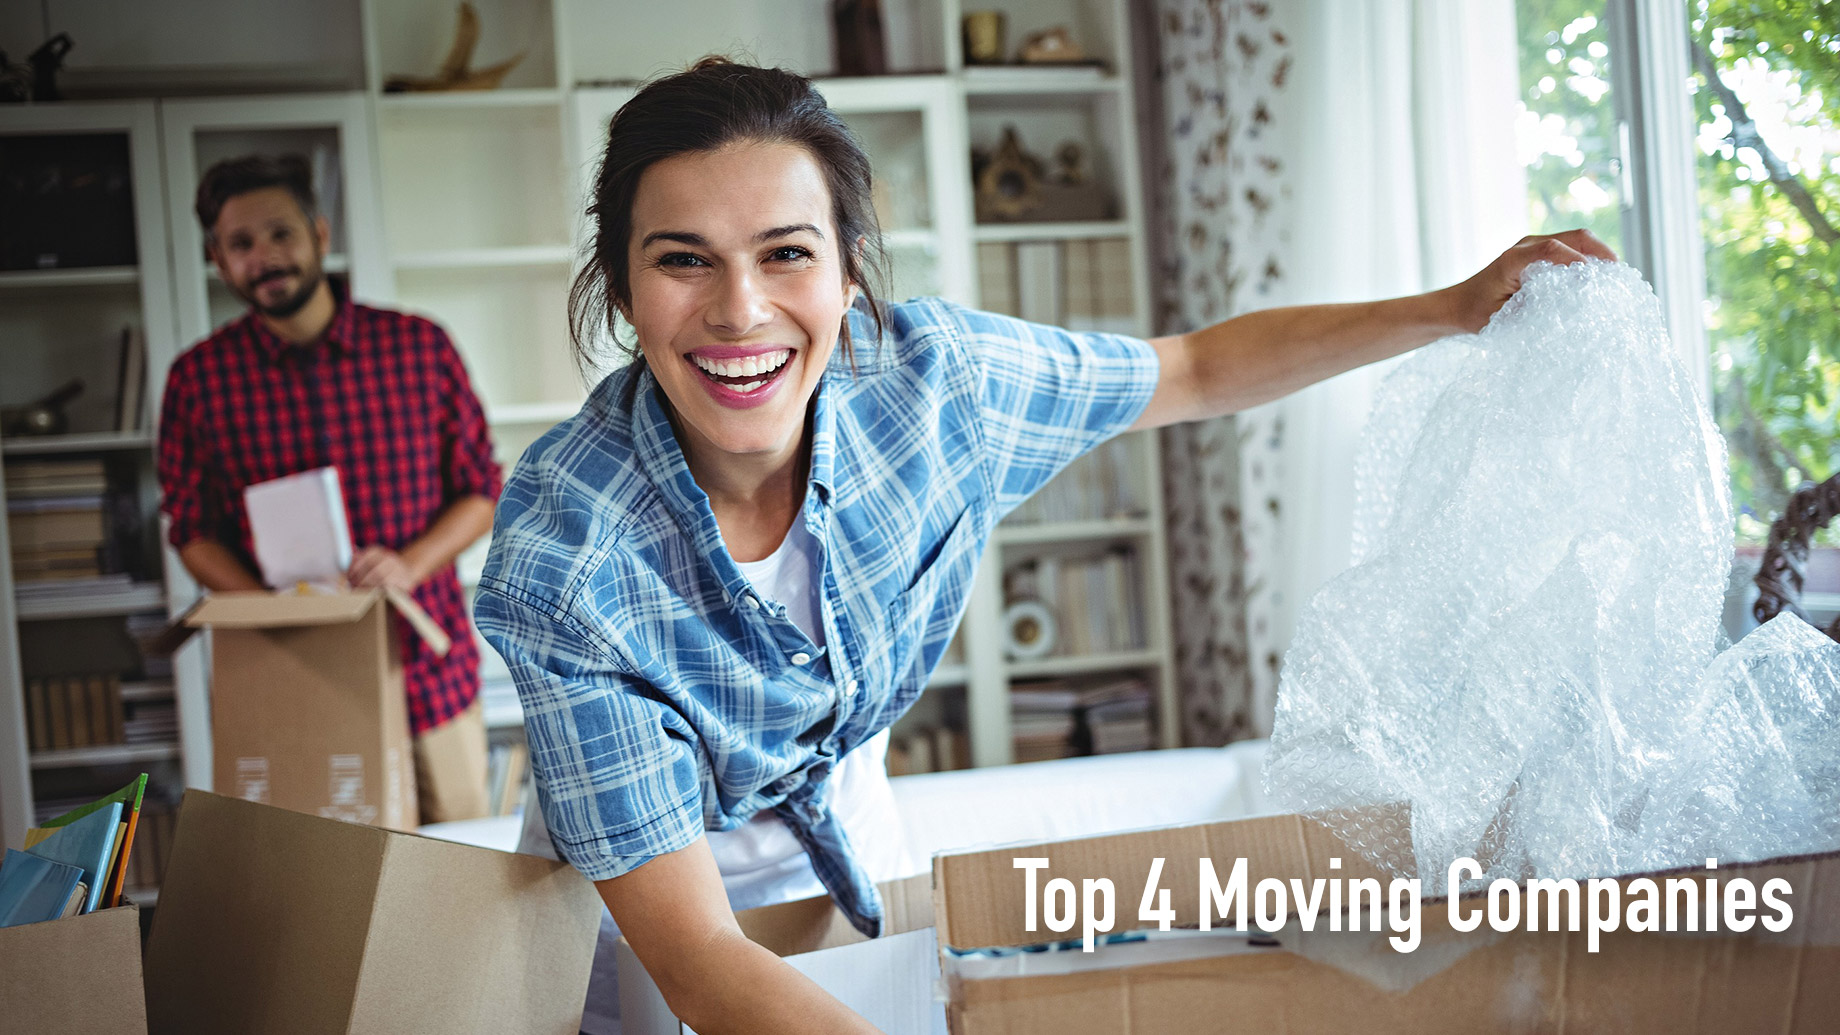 Top 4 Moving Companies in the United States